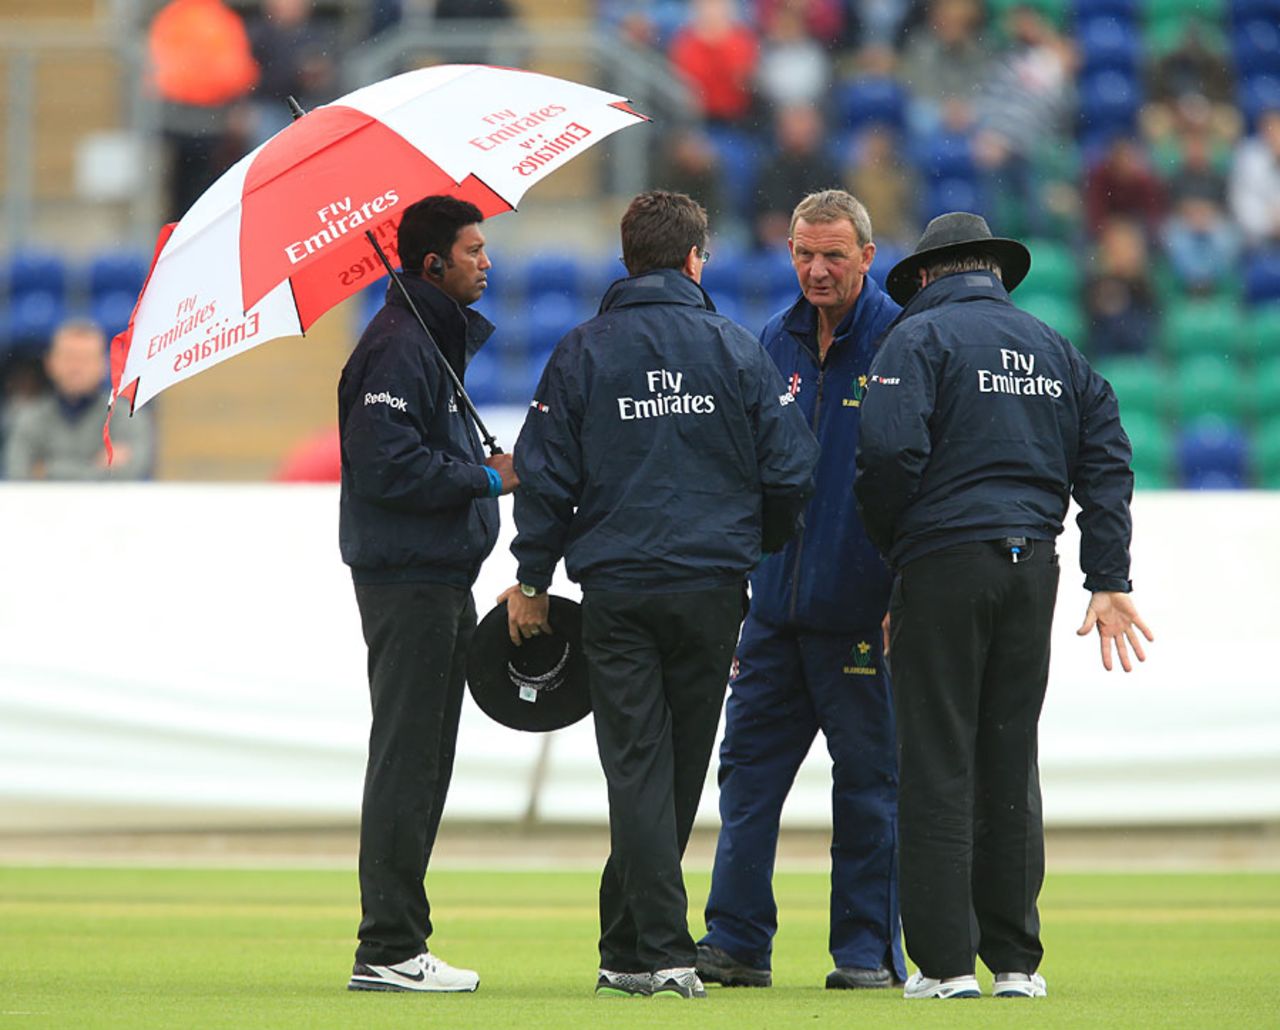 There was not much for the umpires to do, England v New Zealand, Champions Trophy, Group A, Cardiff, June 16, 2013